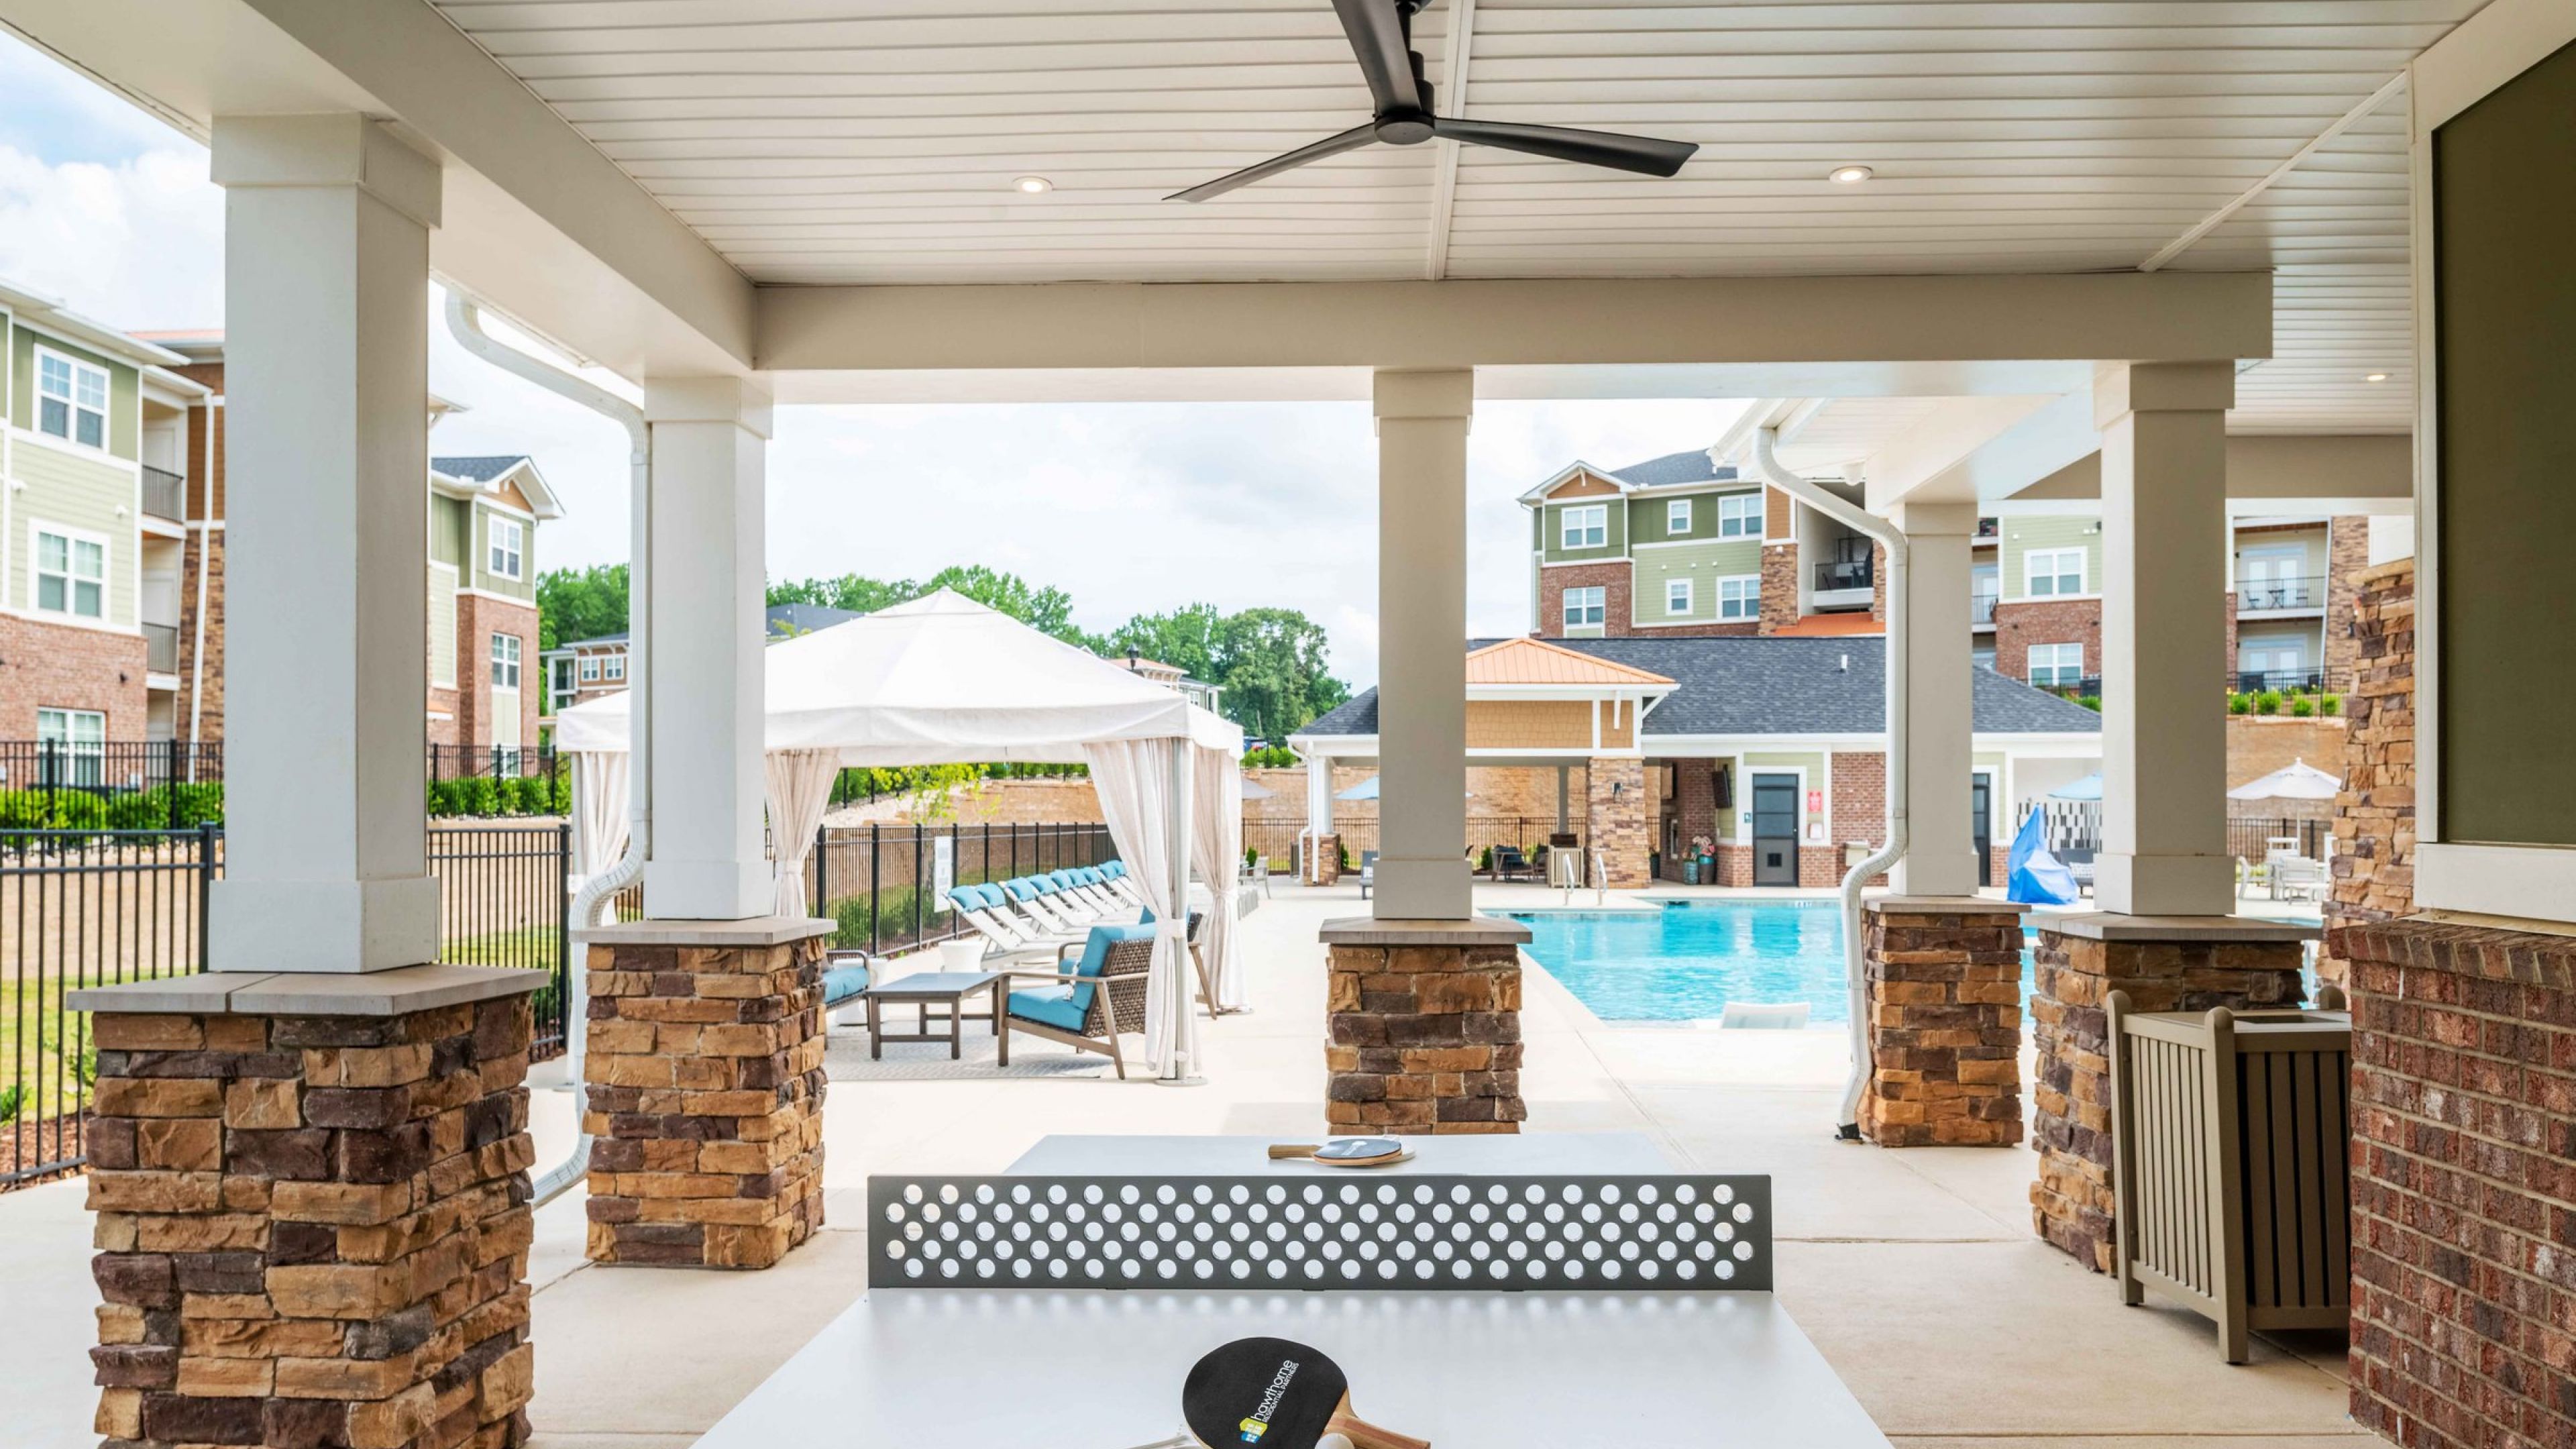 Hawthorne Waterstone outdoor amenity space with ping pong table and poolside cabanas